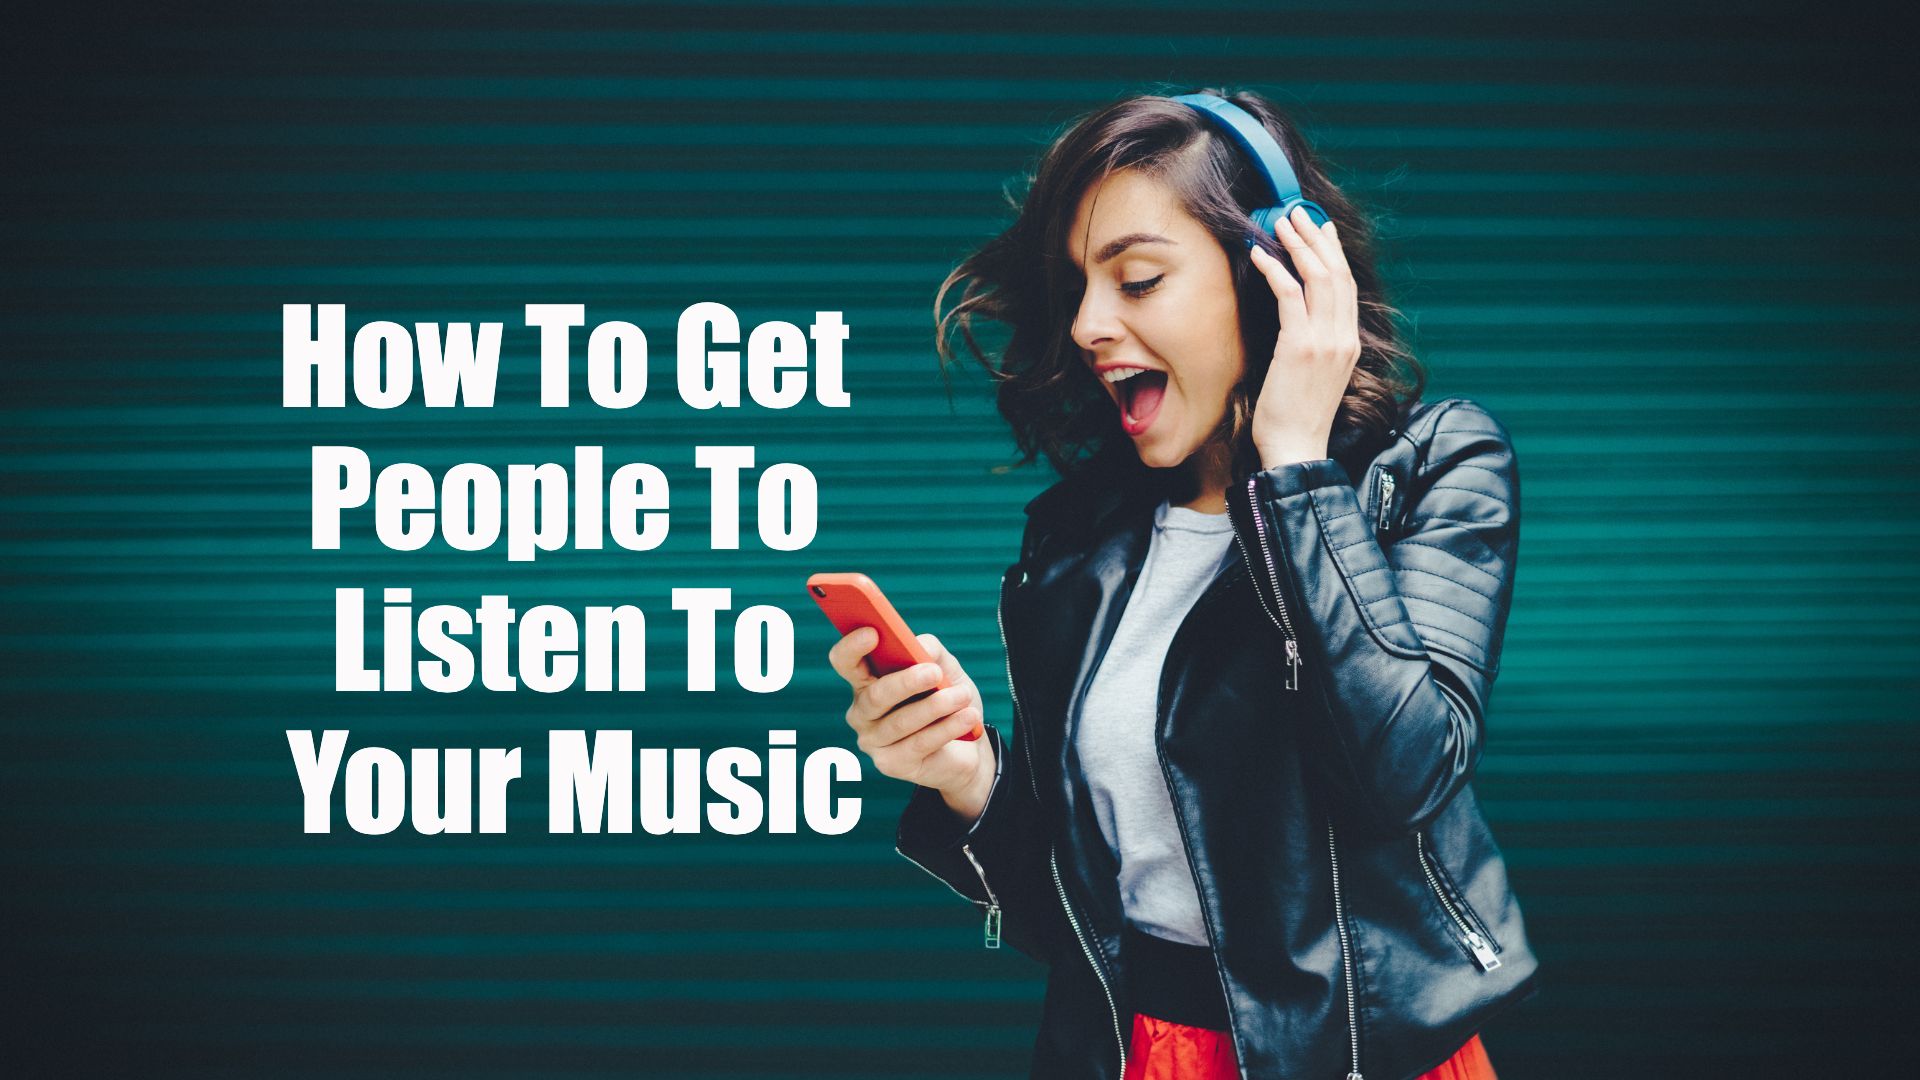 How To Get People To Listen To Your Music